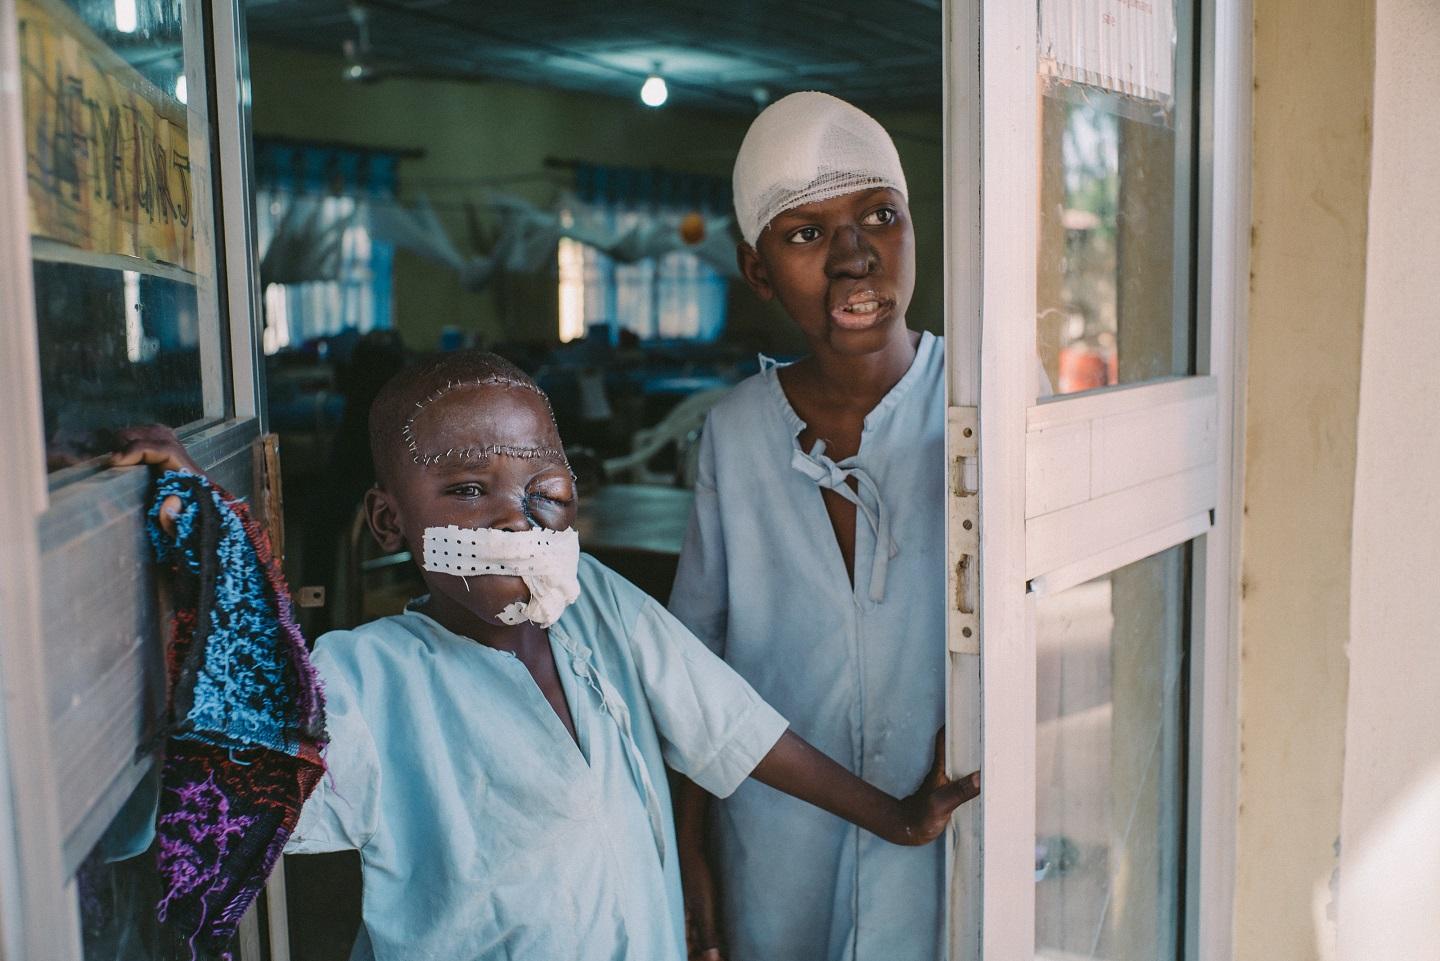 Umar, 8, and Adamu, 15, stand at the entrance of the post-operative ward at the Sokoto Noma Hospital. They recently underwent surgery and are confined to the ward to avoid infections. Nigeria, October 2018. 